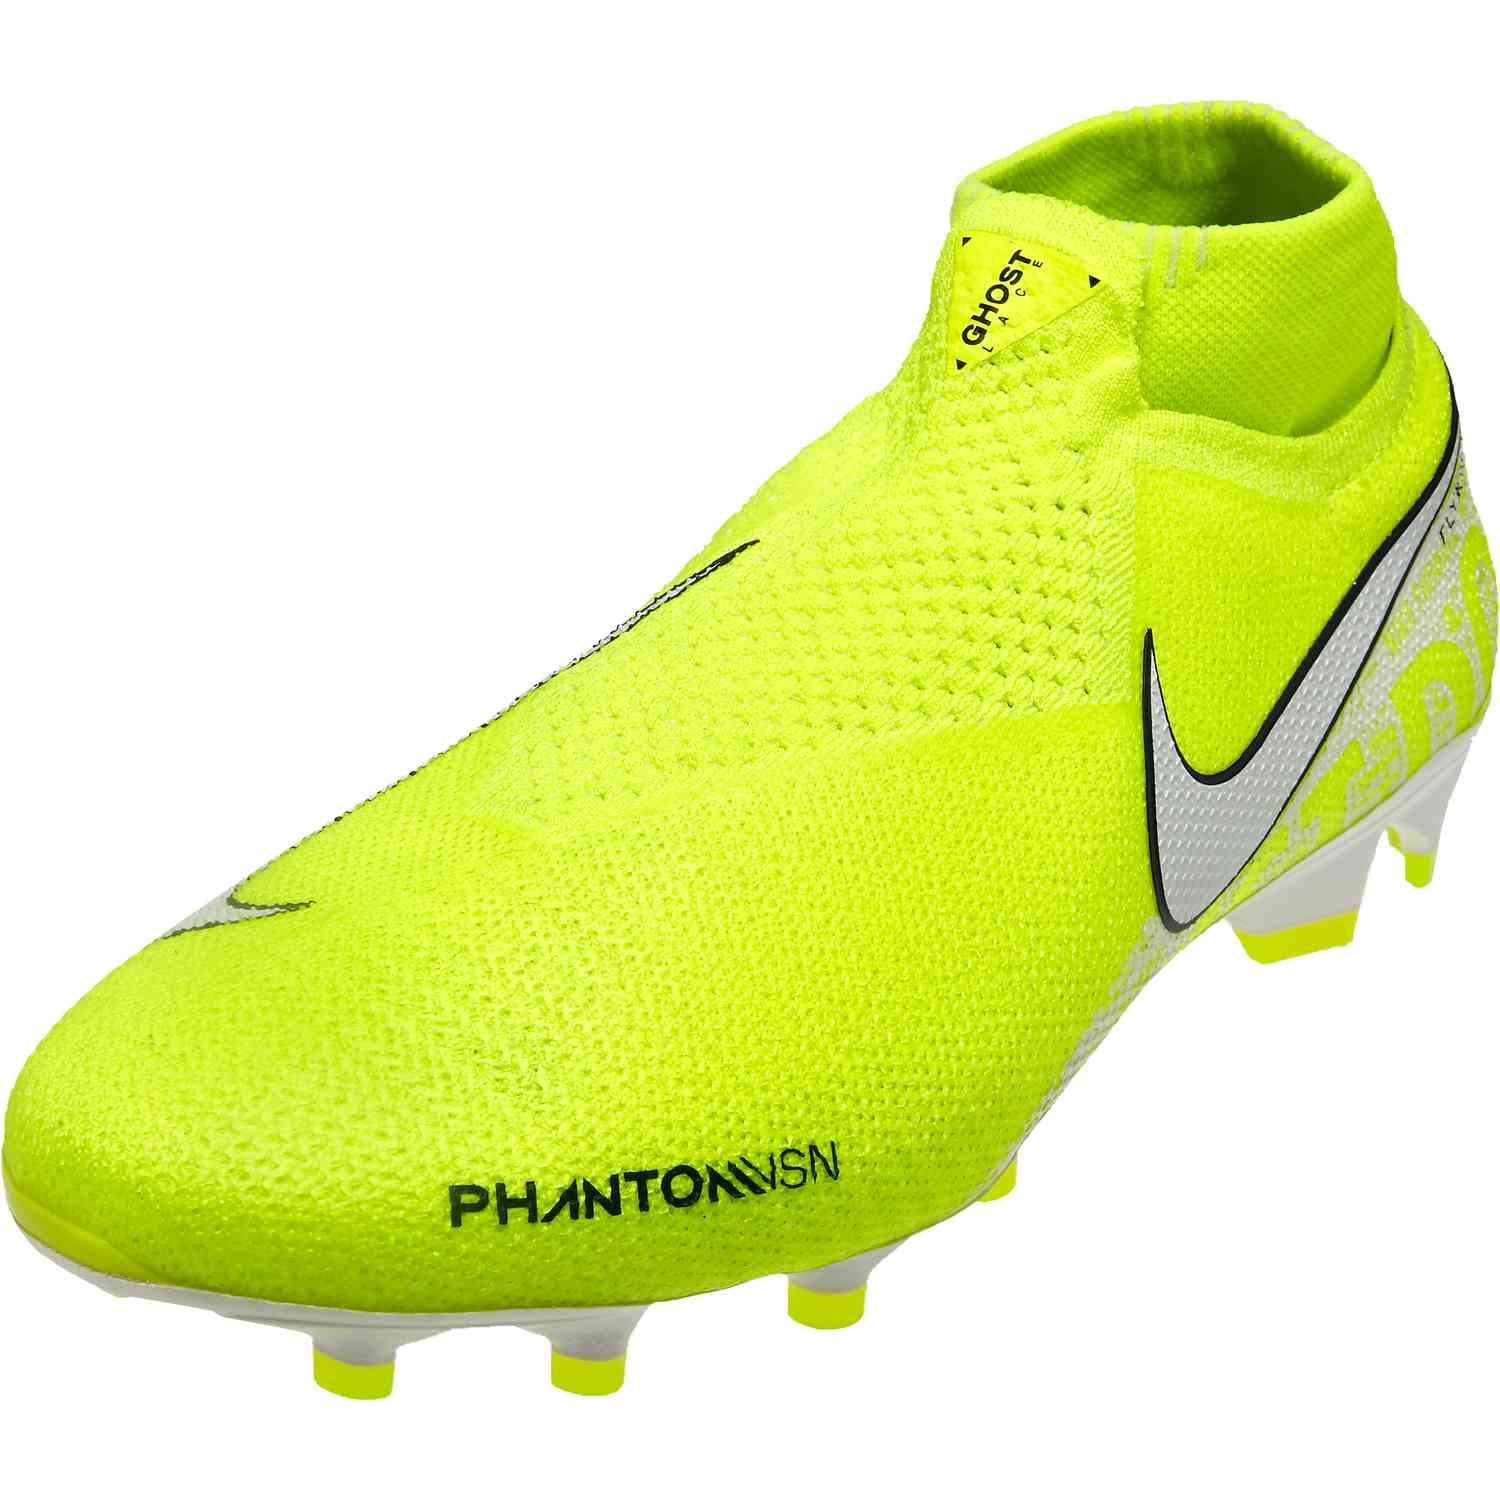 The Top 10 Best Nike Football Boots/Soccer Cleats - Thefootystore